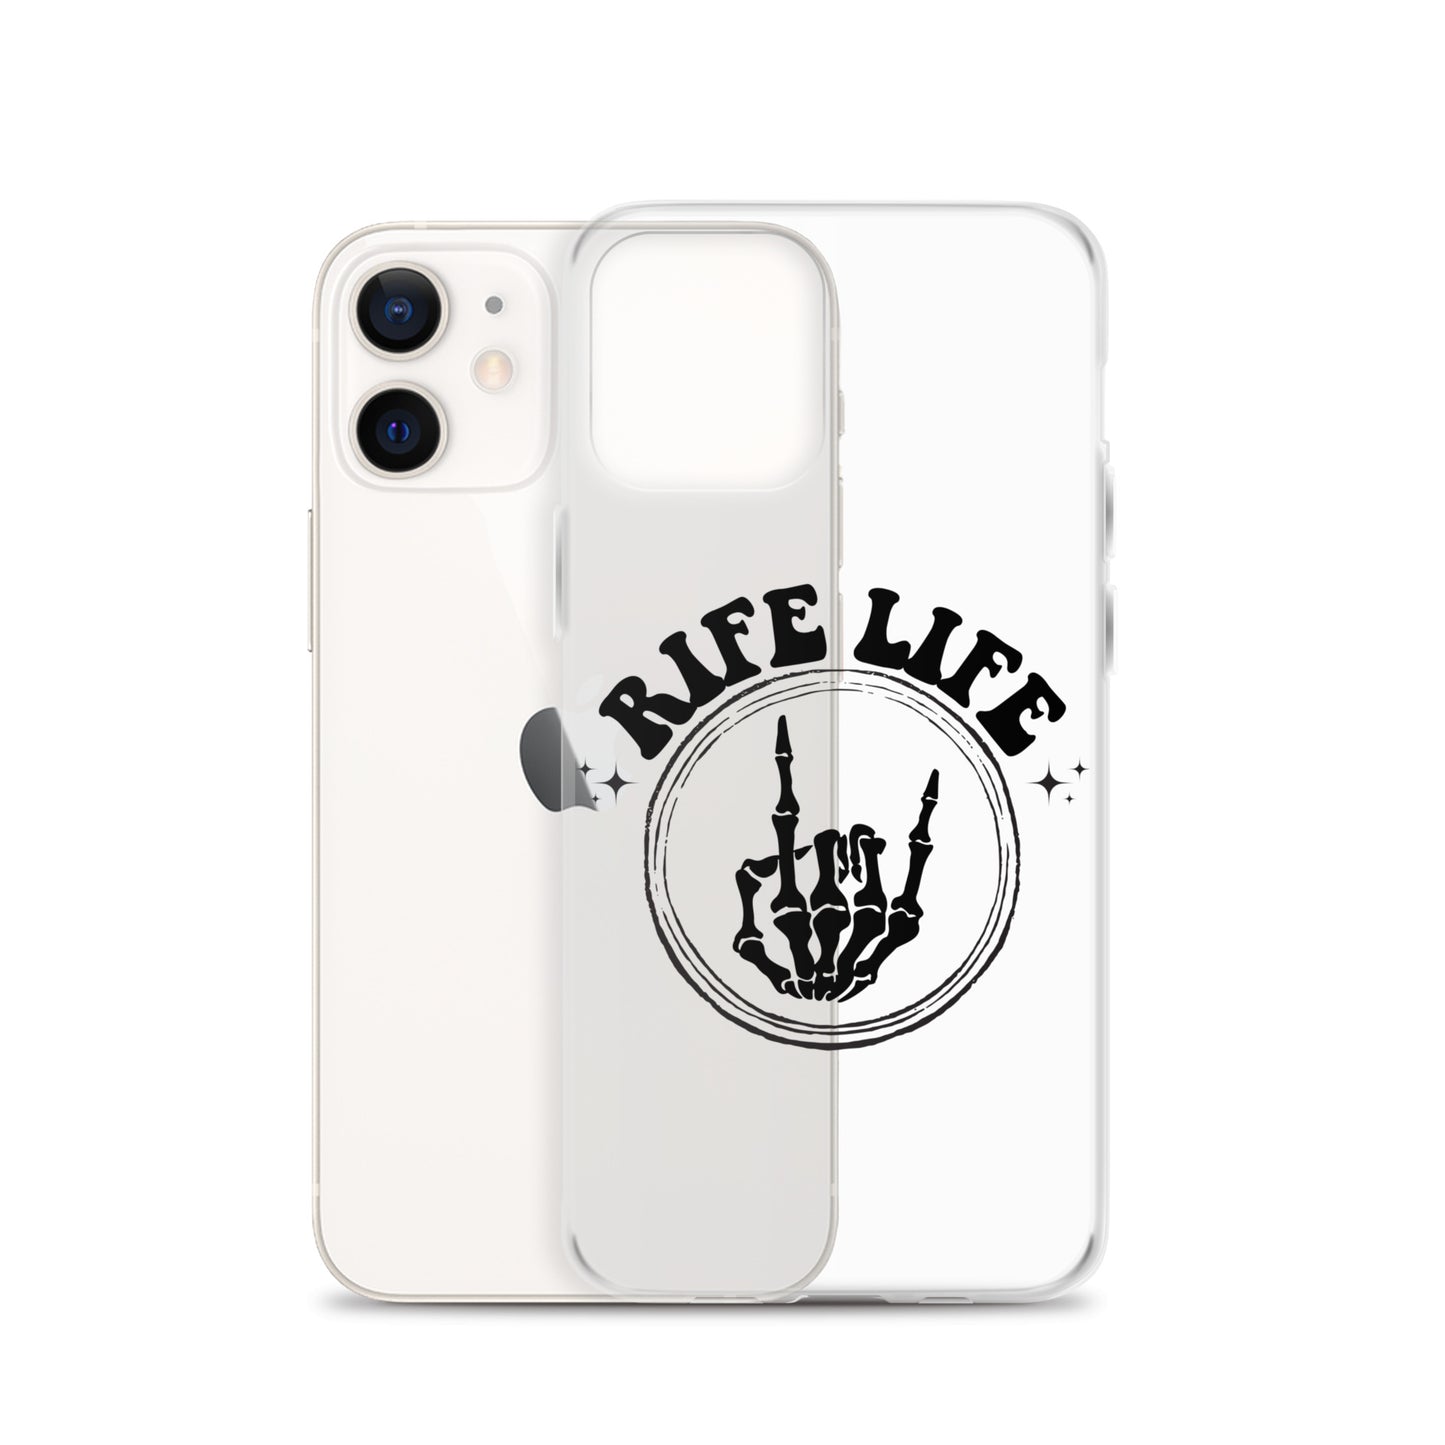 Rife Life Clear Case for iPhone®